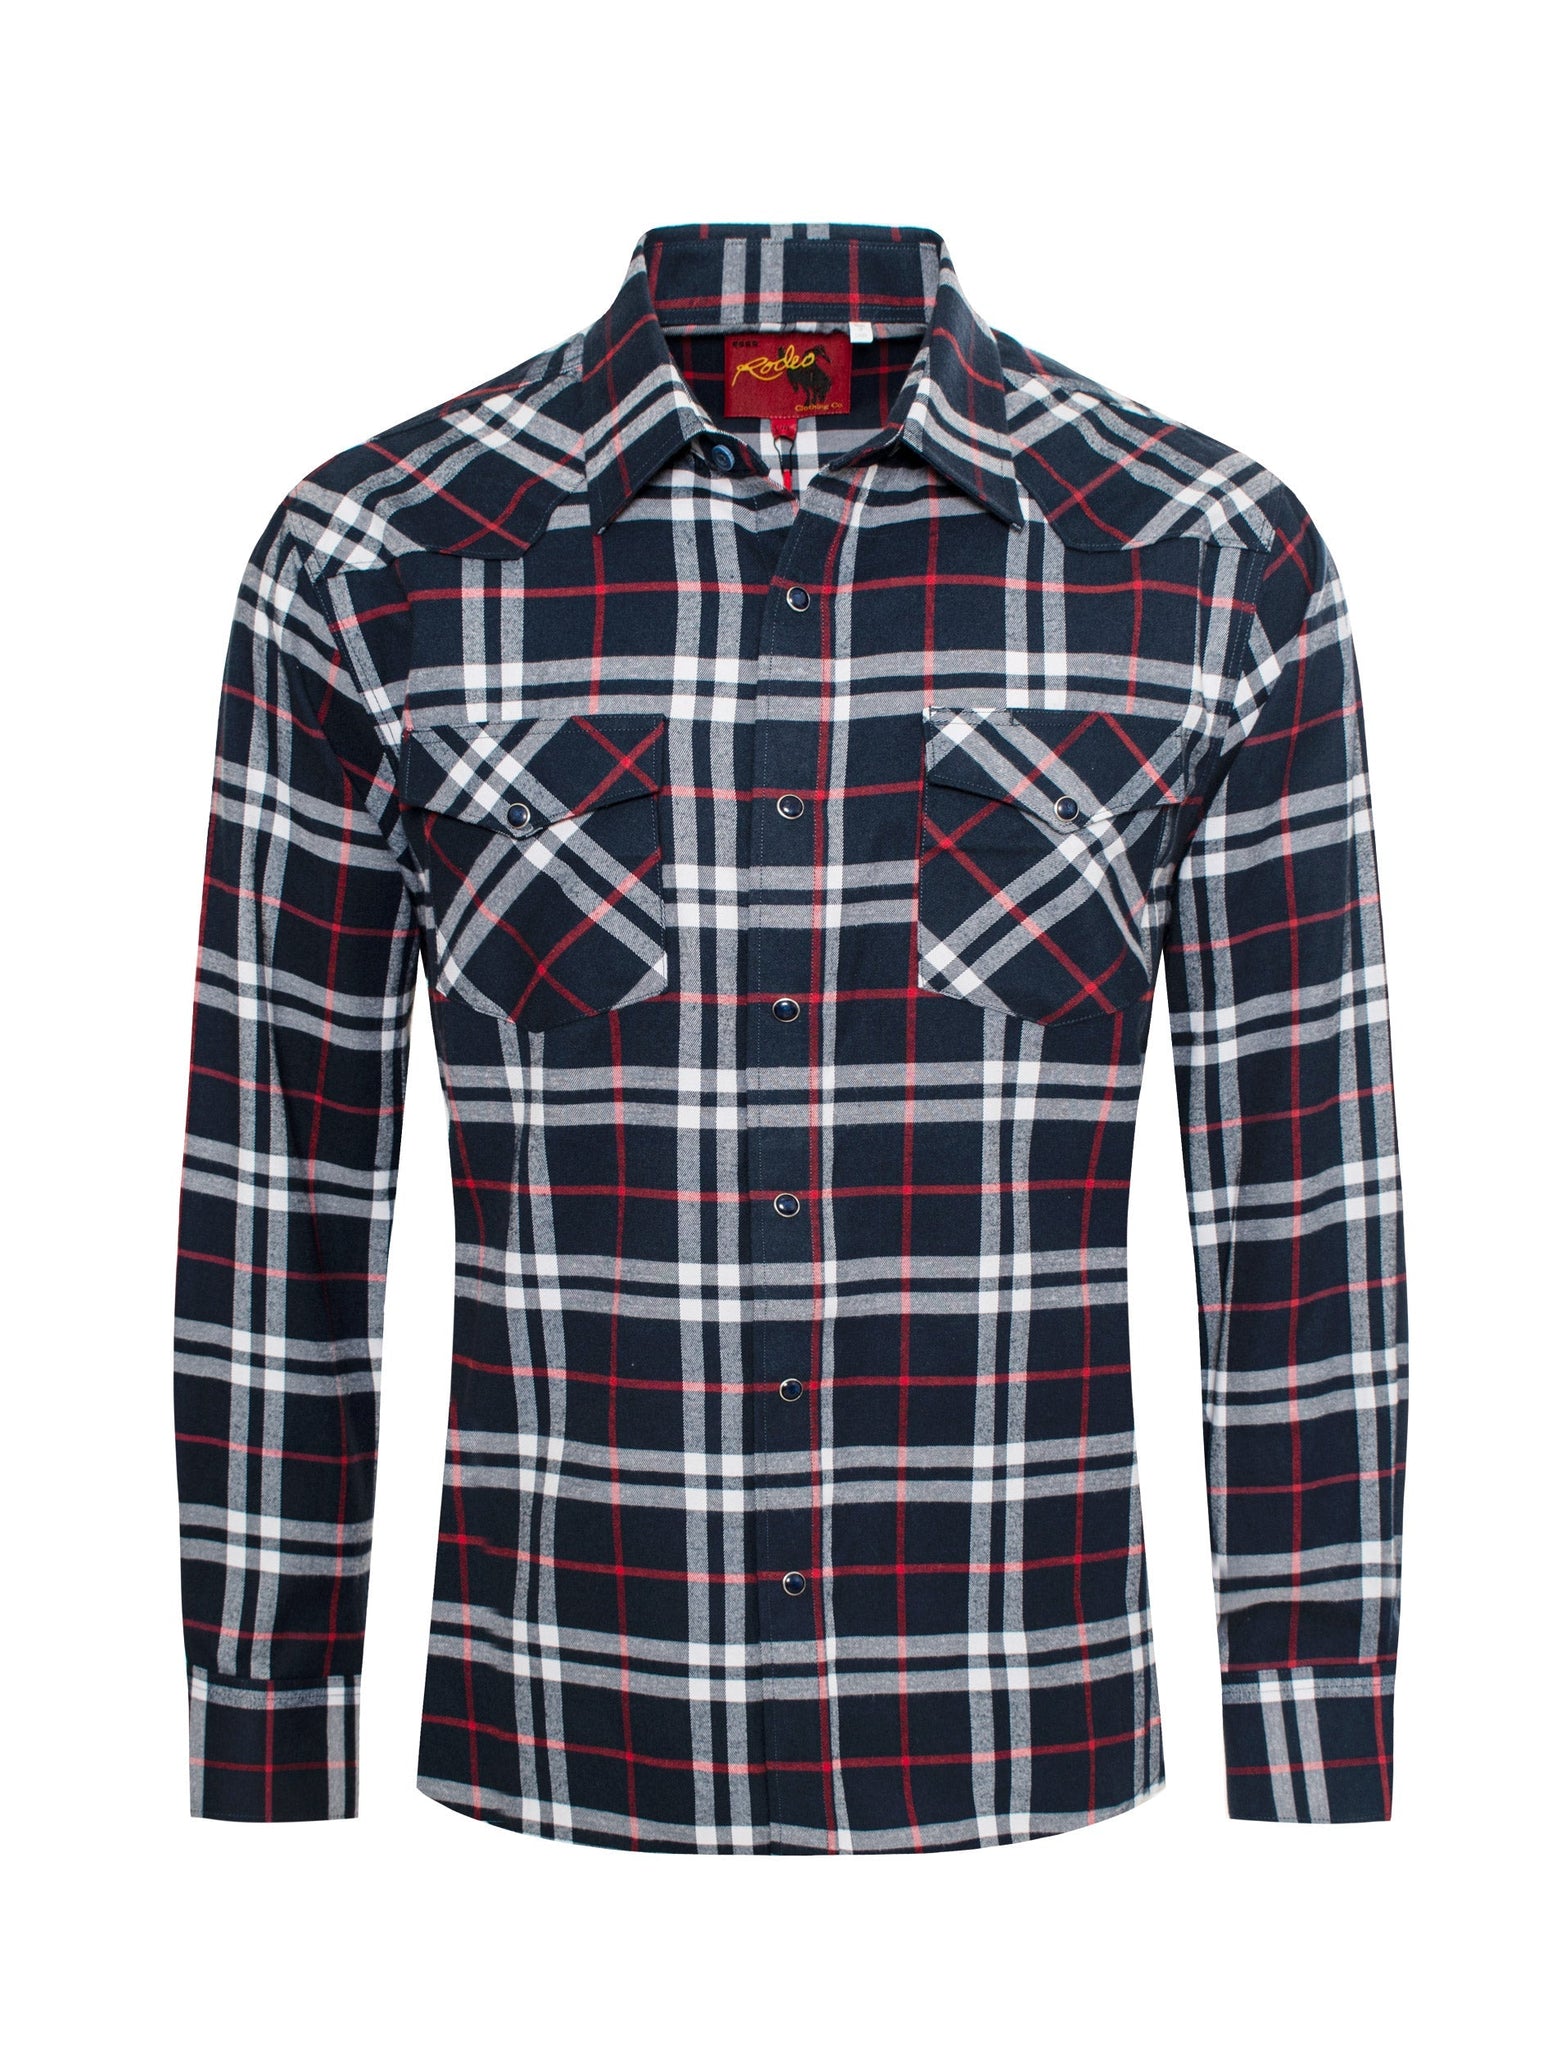 Men's Western Flannel Shirts With Snap Buttons -FLS300-306